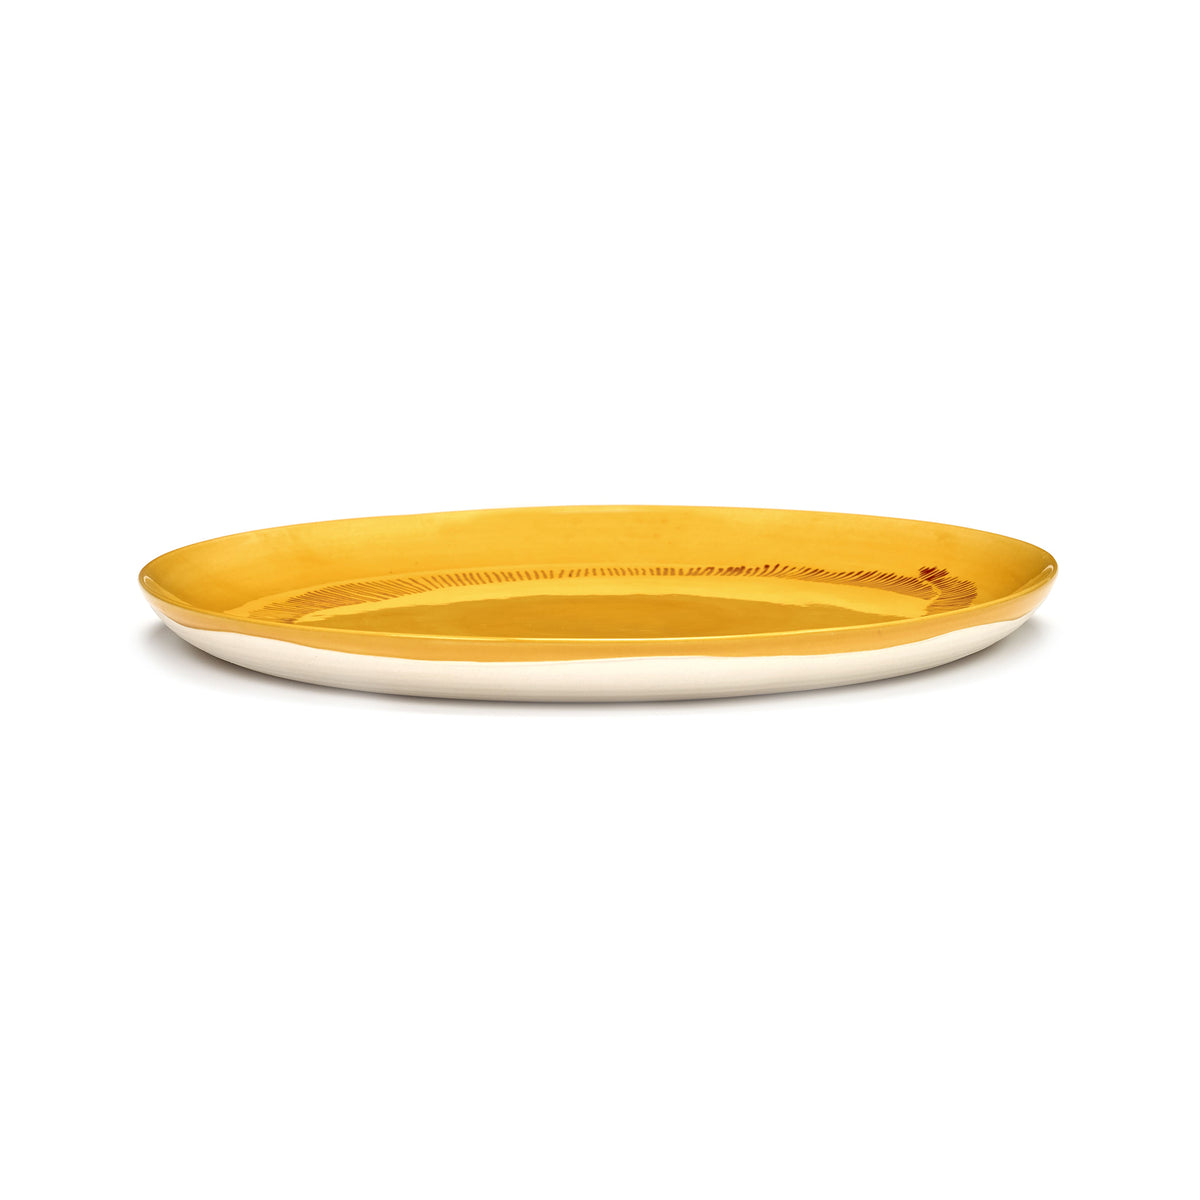 Sunny Yellow Plate with Red Stripes - L